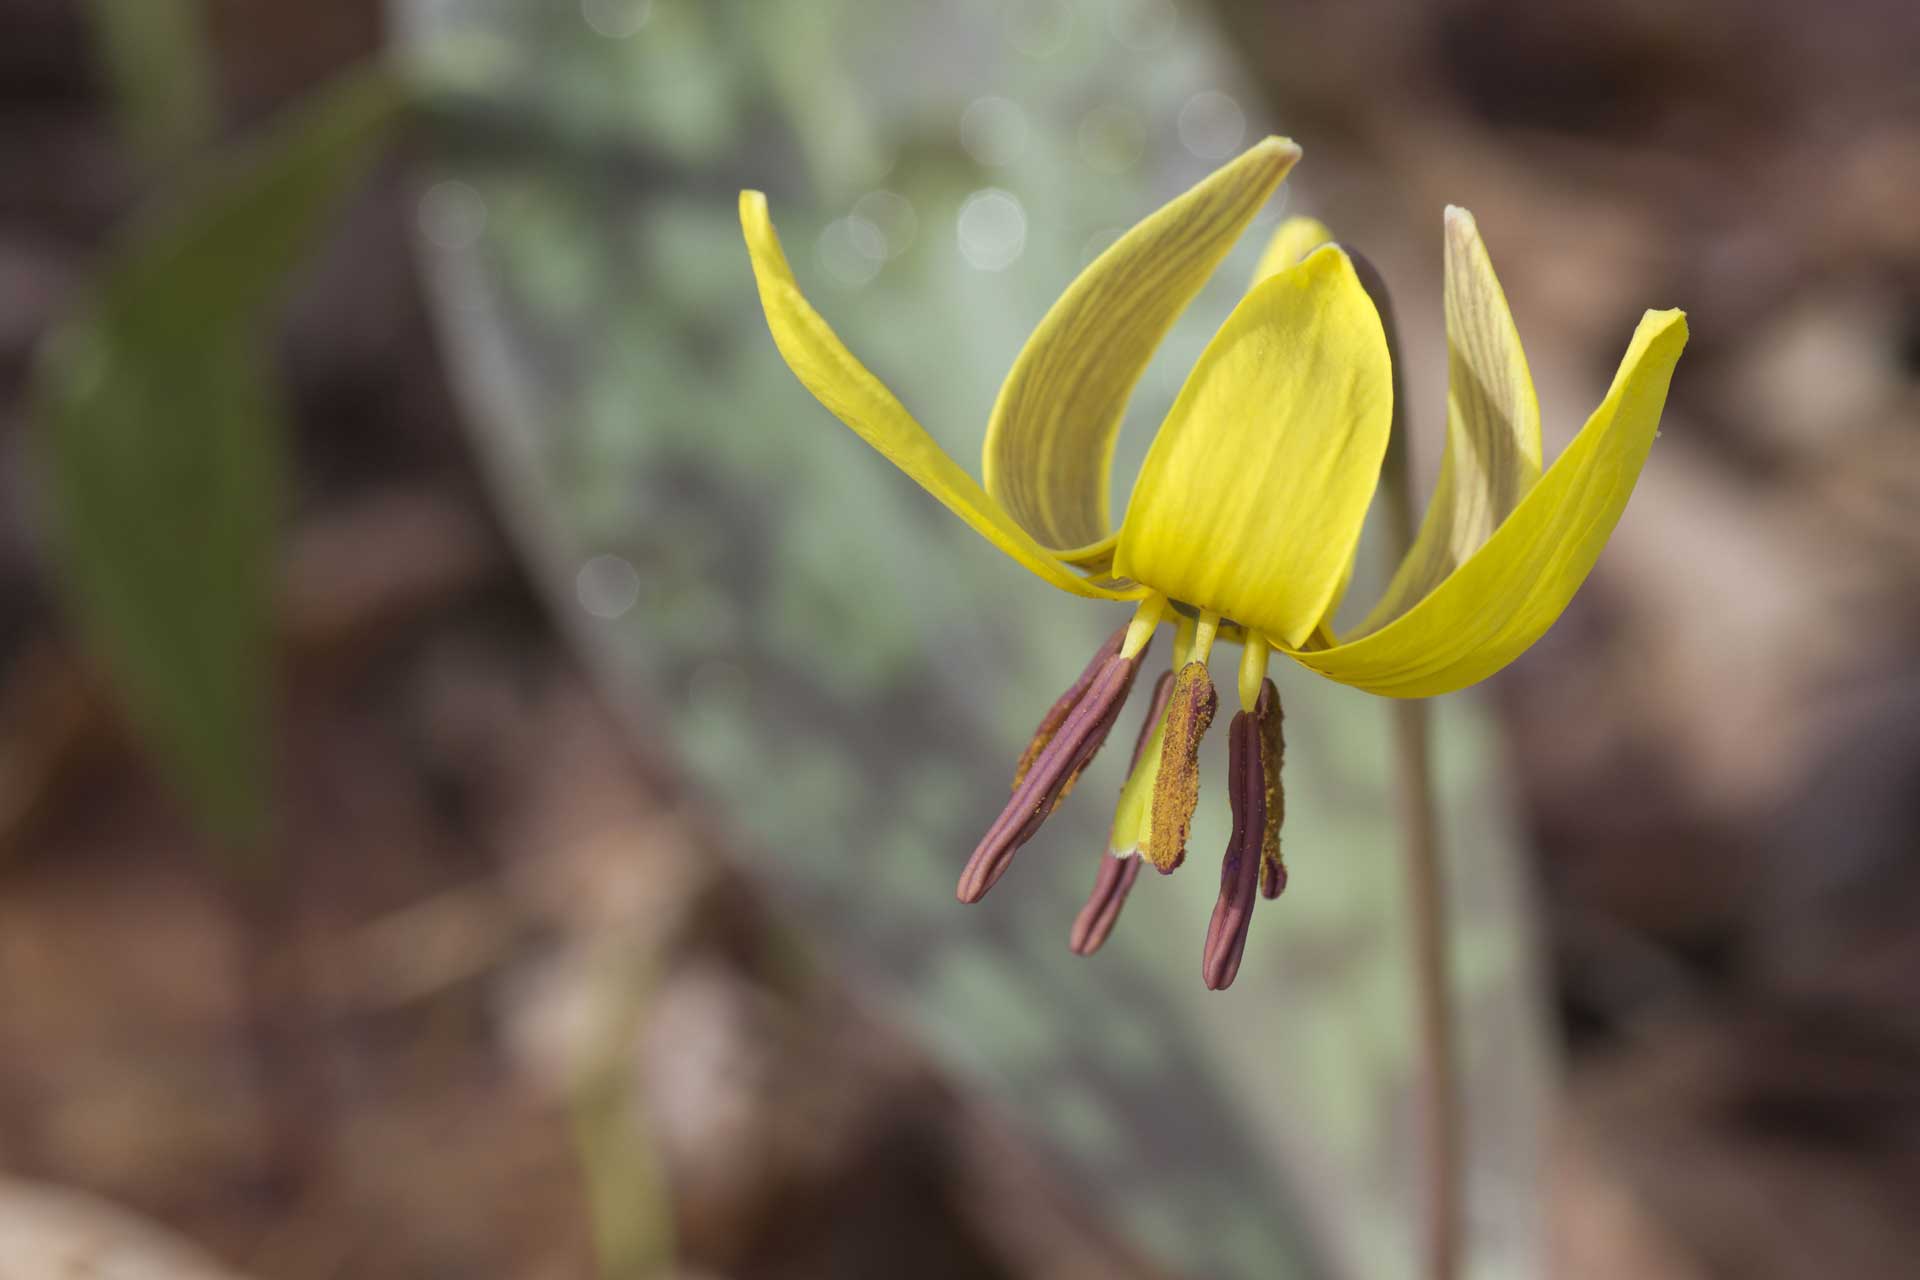 shallow depth of field shot of a trout lily flower